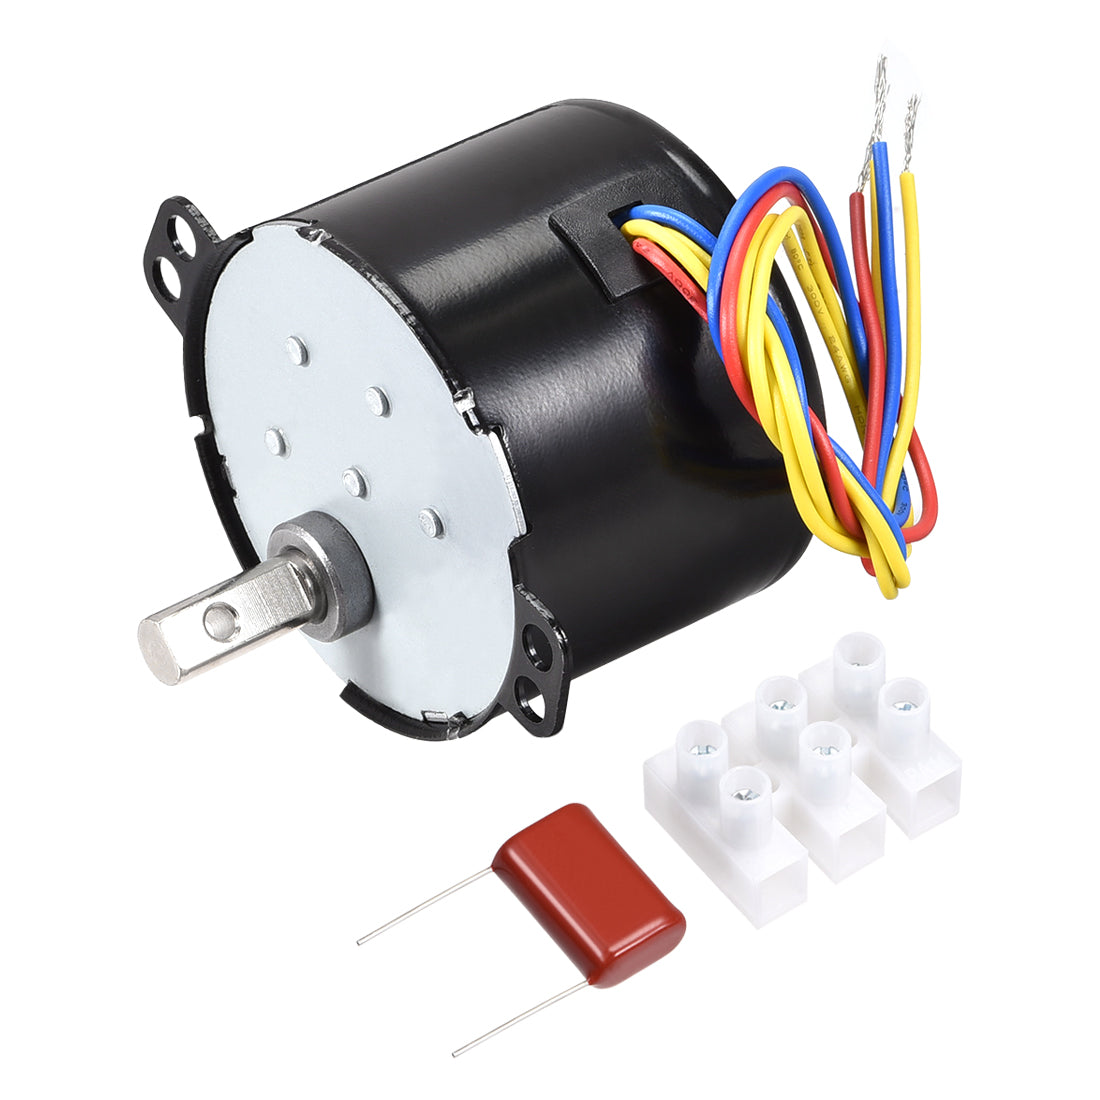 uxcell Uxcell Synchronous Motor Plastic Gear Terminal 5RPM 7mm Eccentric Shaft with Hole